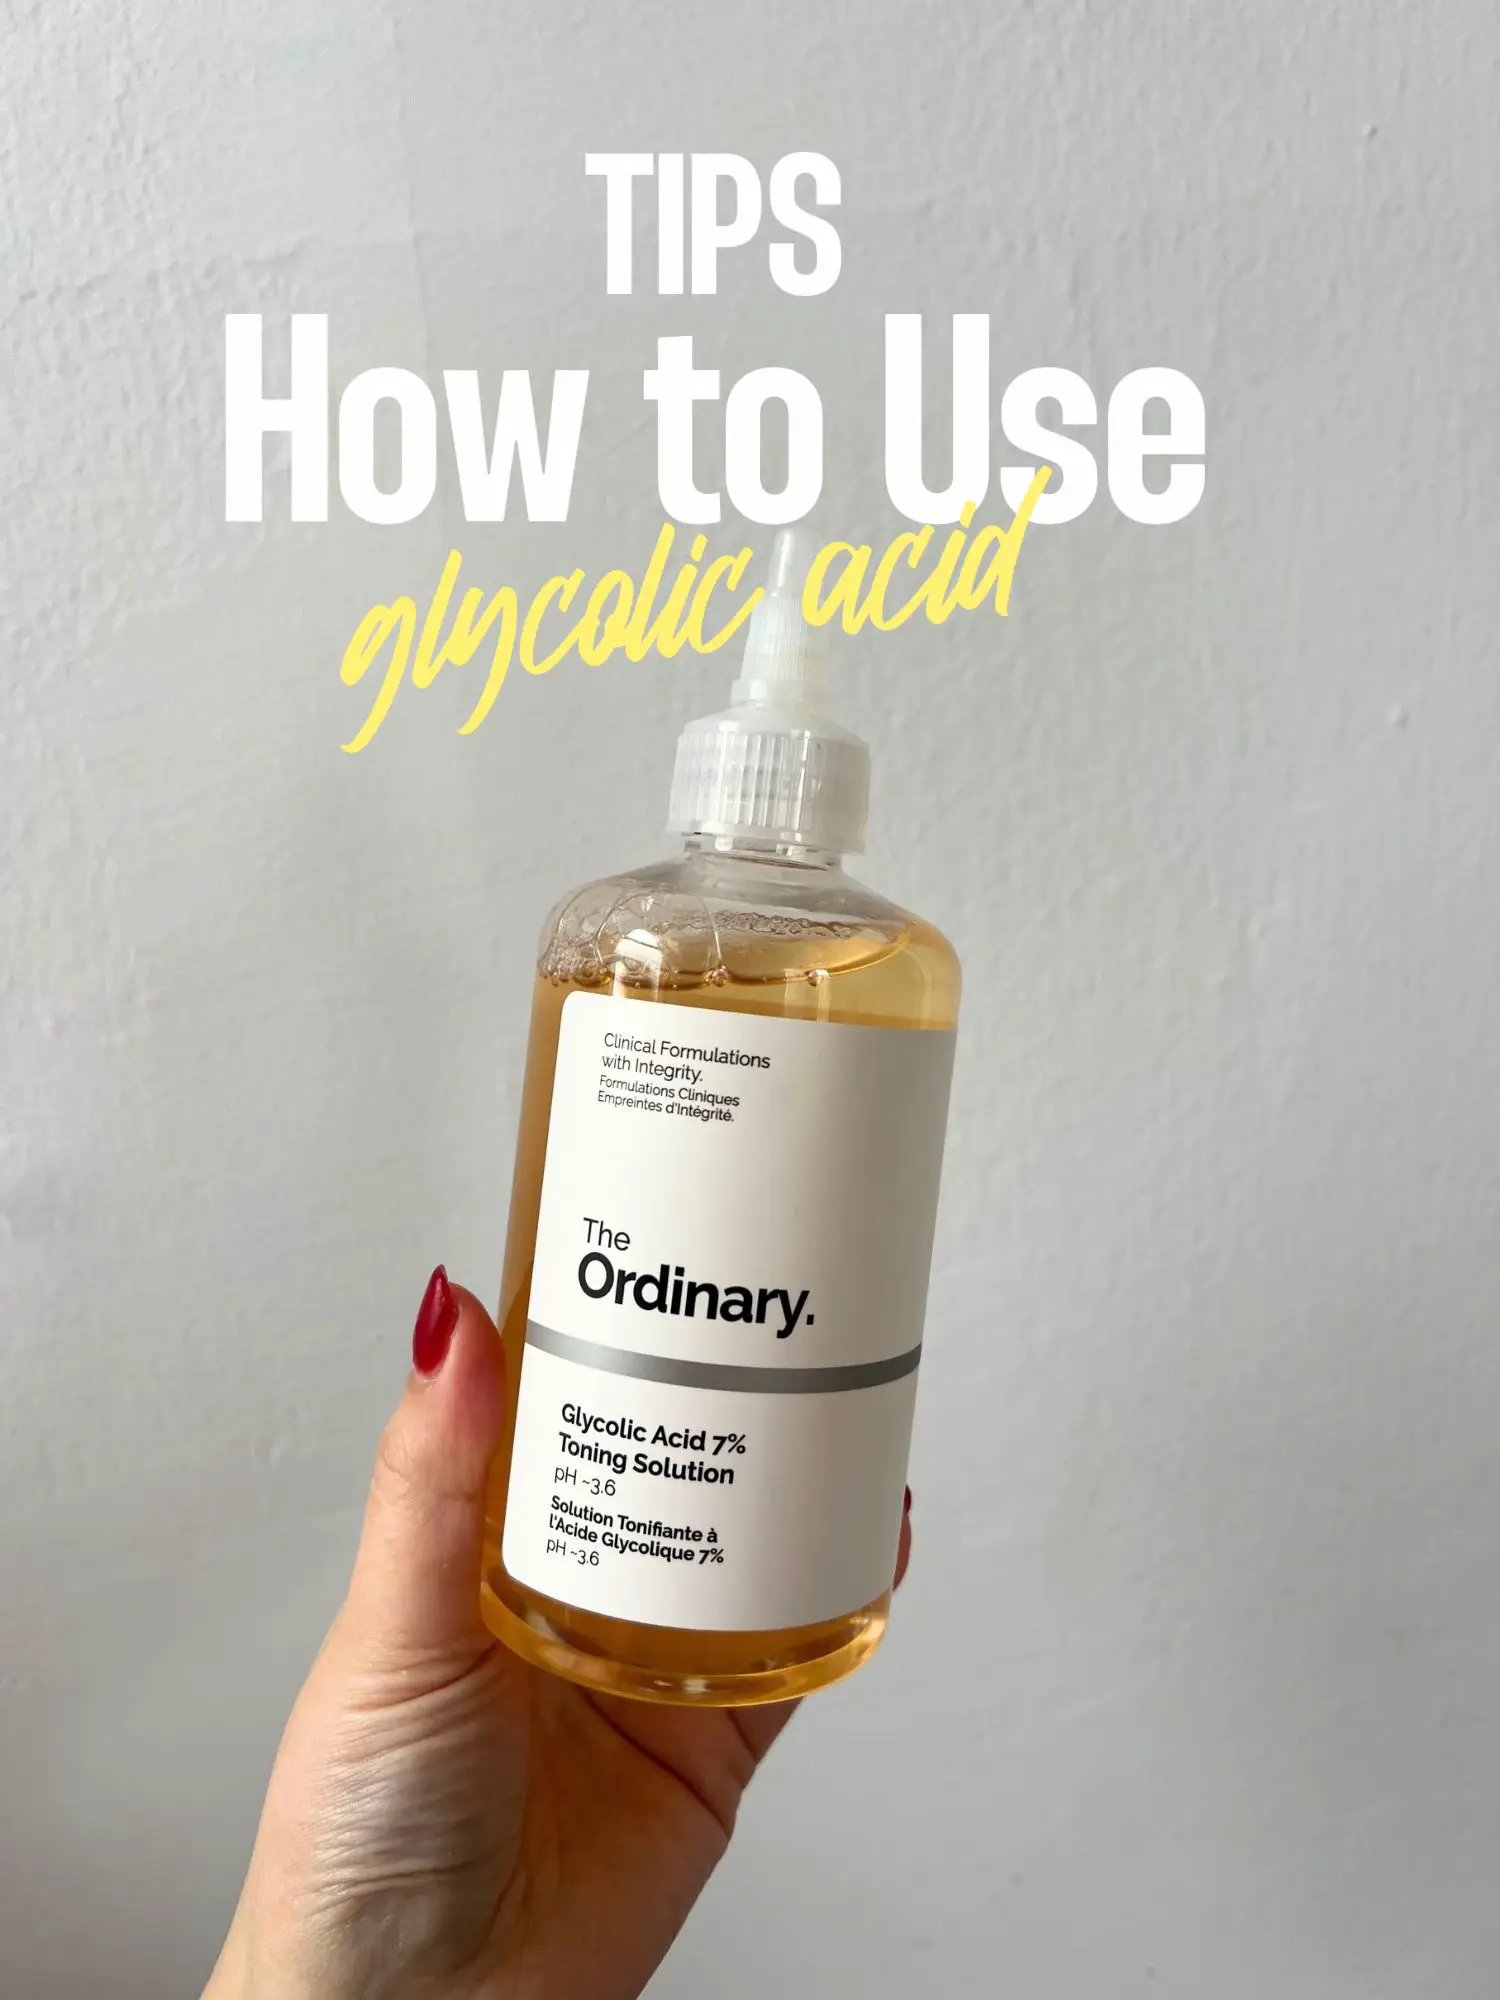 How to Use Glycolic Acid Toner from The Ordinary in Four Different Ways